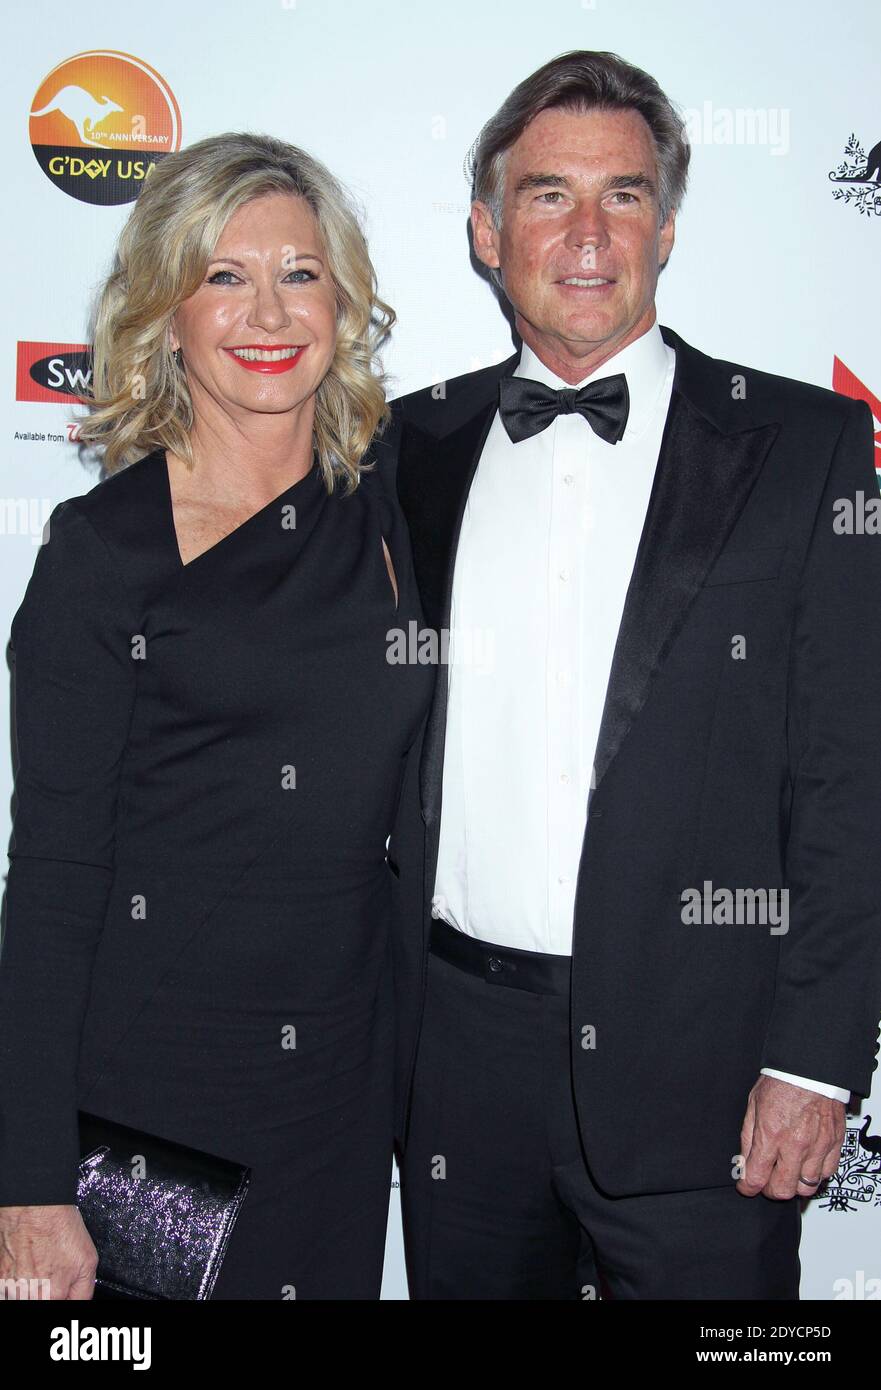 Olivia Newton-John and husband John Easterling arriving for The 2013 G'Day USA Los Angeles Black Tie Gala at the JW Marriott at L.A. LIVE in Los Angeles, CA, USA on January 12, 2013. Photo by Baxter/ABACAPRESS.COM Stock Photo